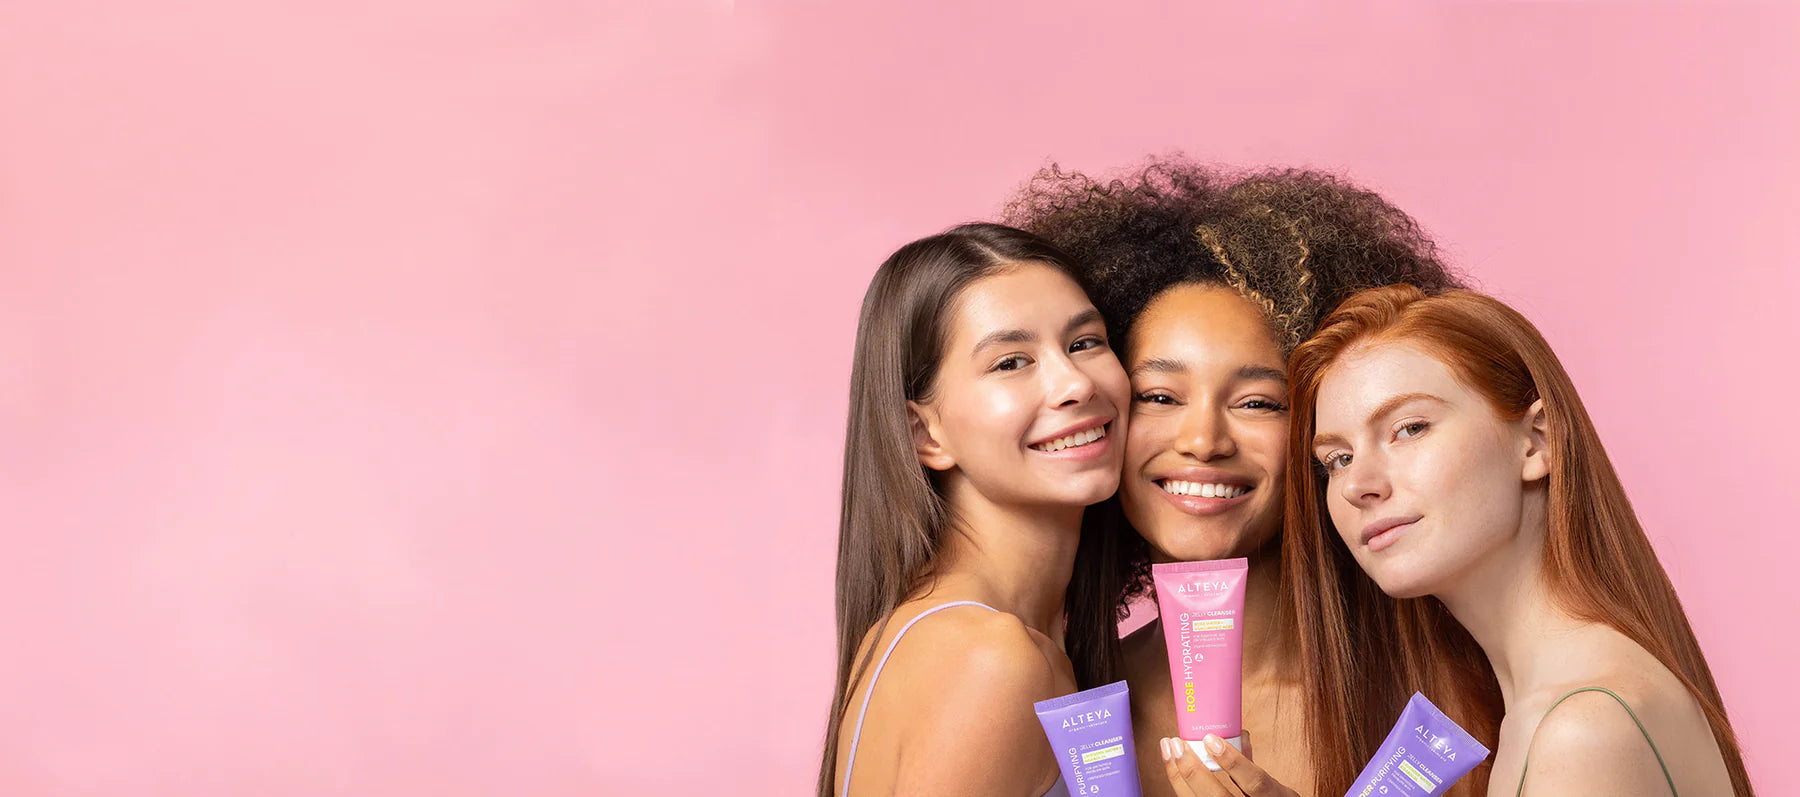 Three young women are posing in front of a pink background.